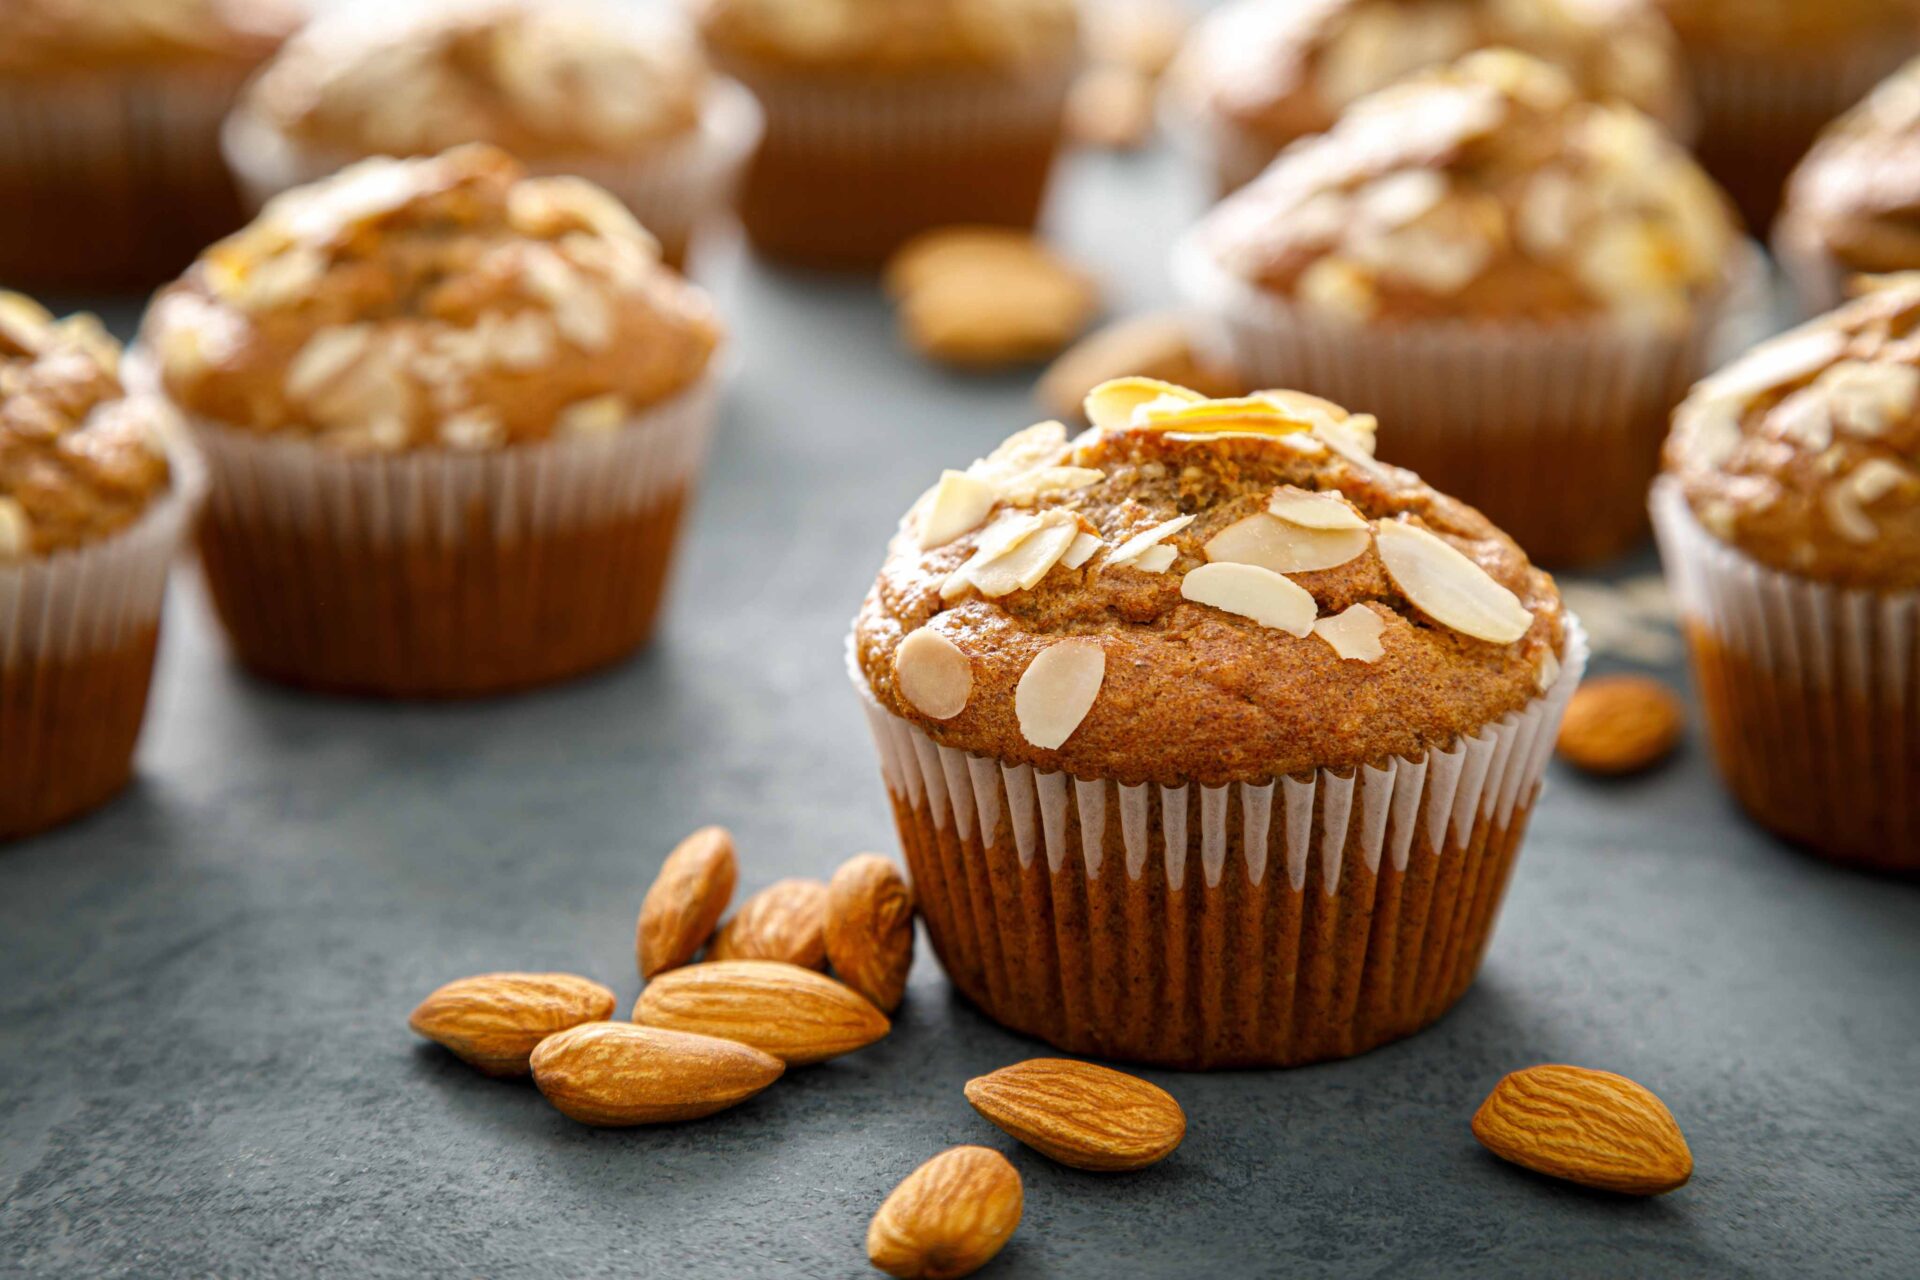 Muffin with Sliced Almonds on top next to scattered raw whole almonds